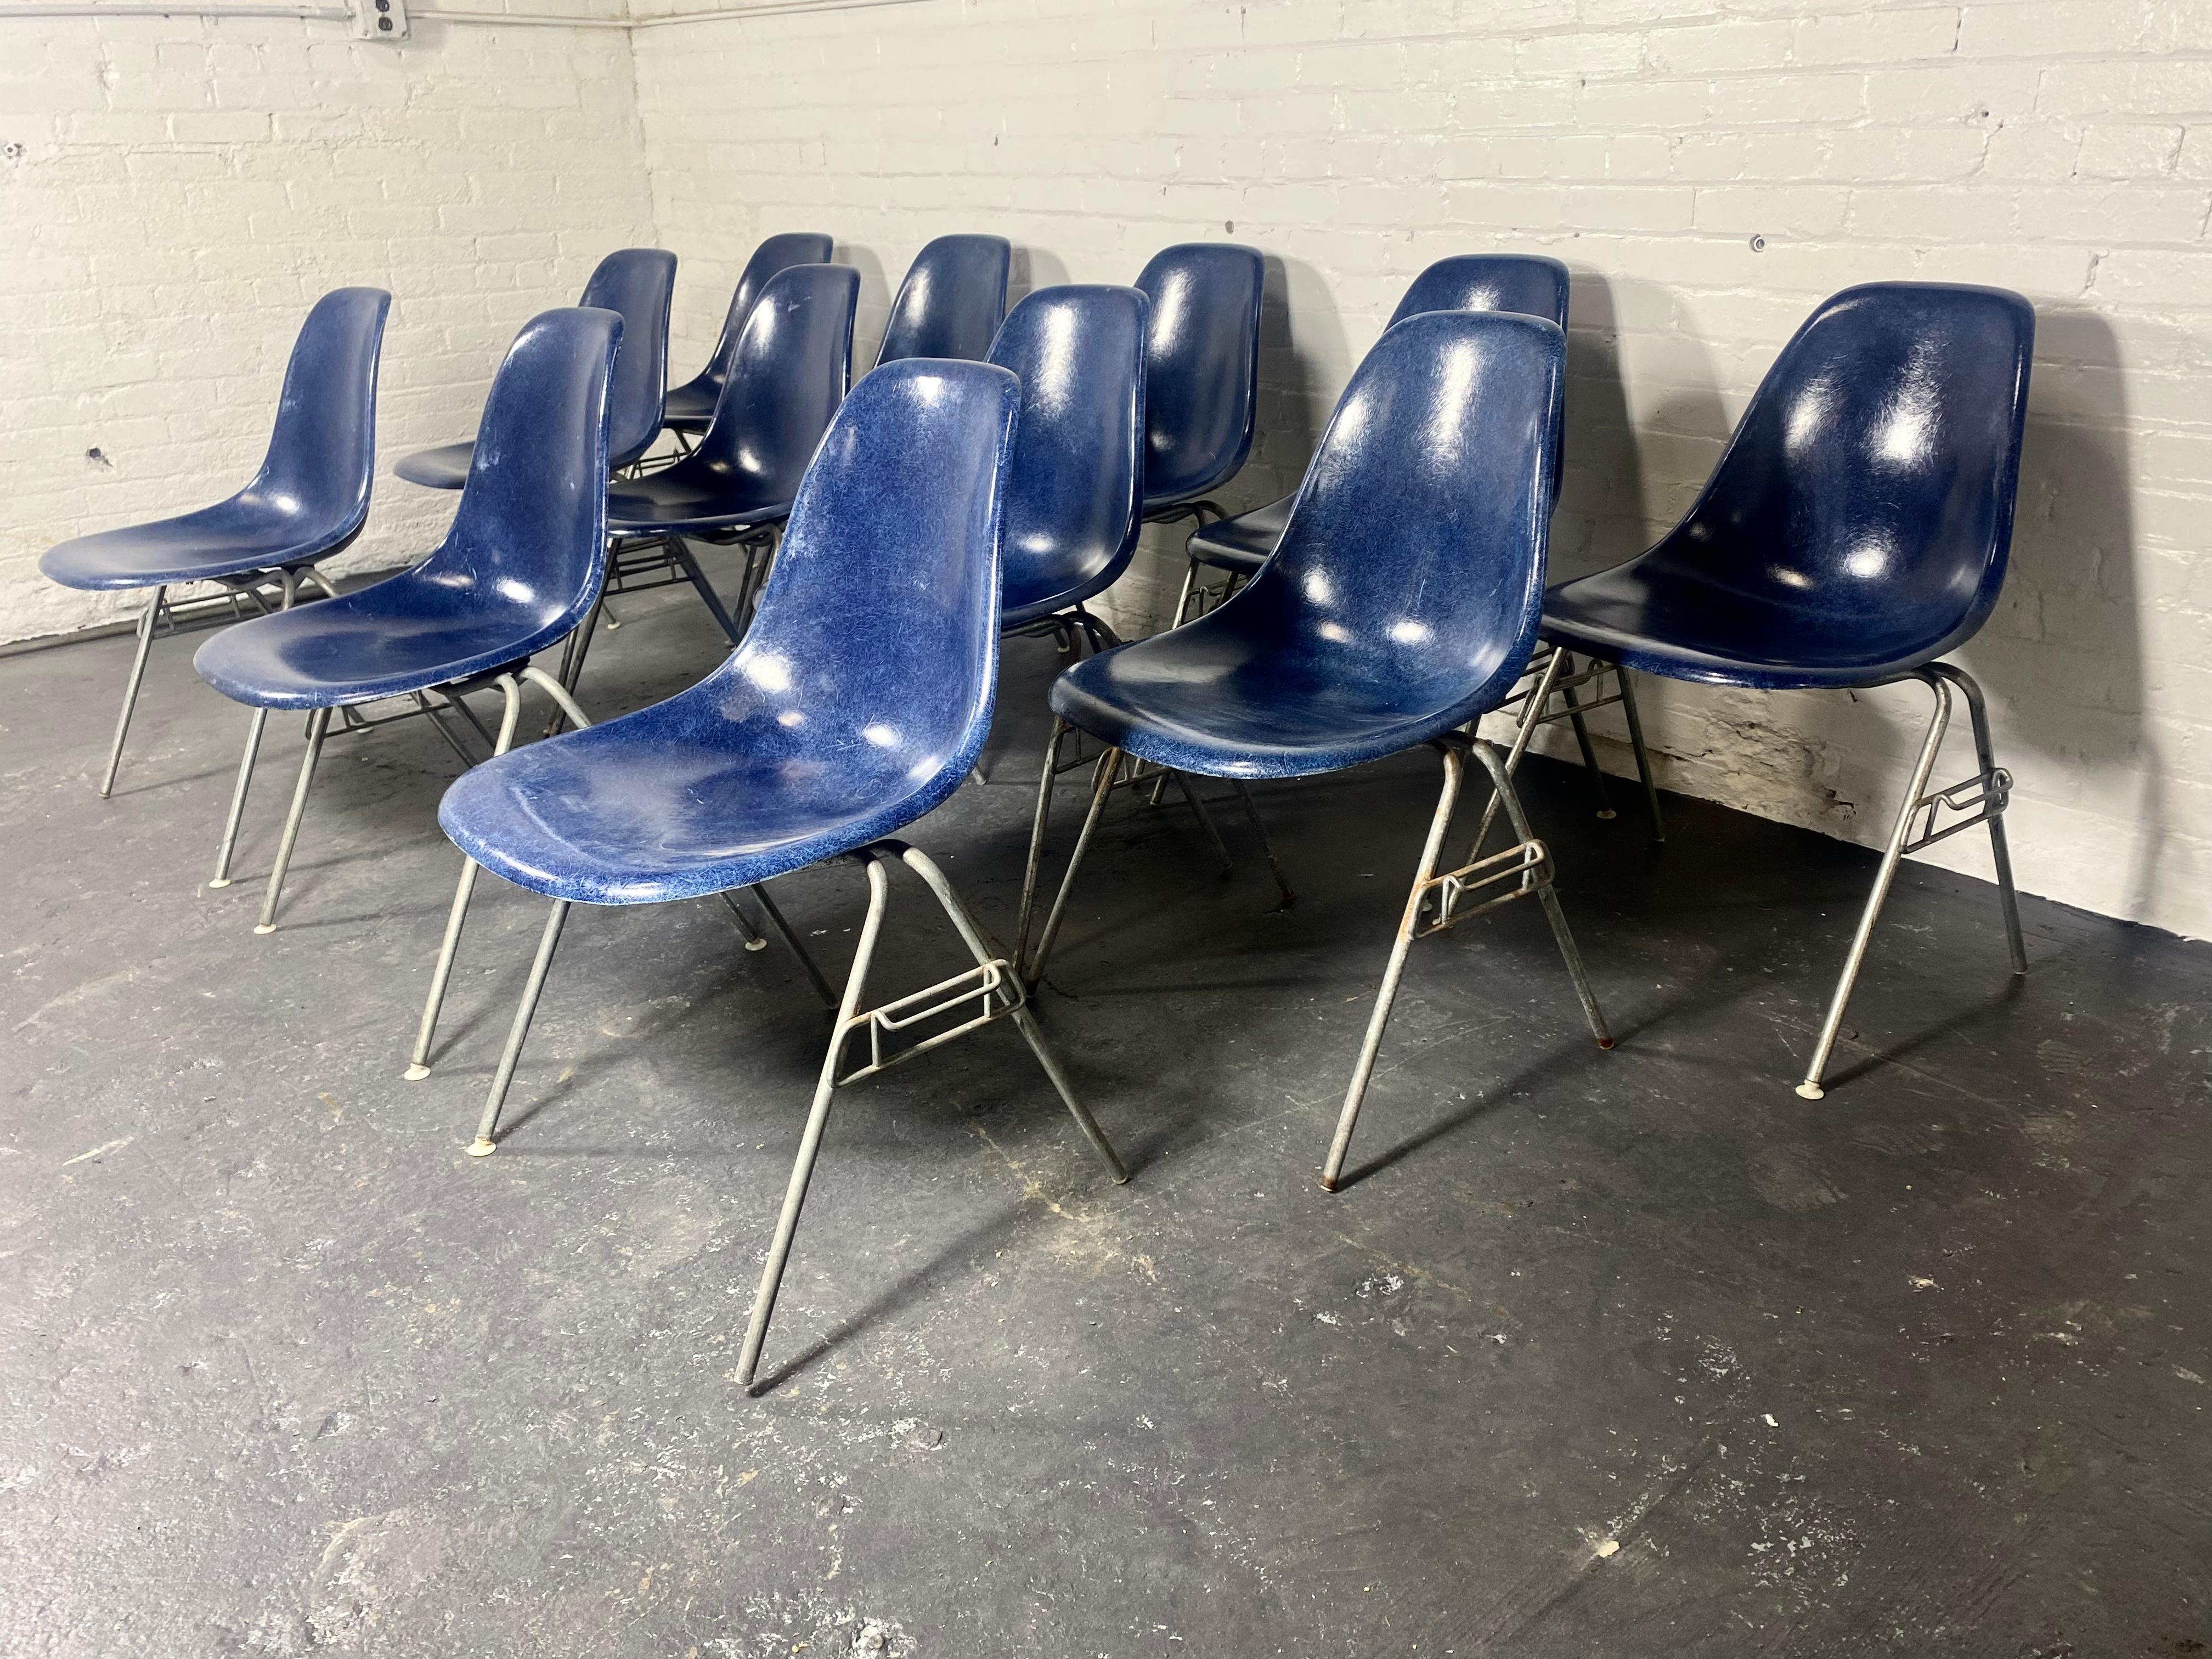 12 DSS Stacking Chairs Charles & Ray Eames Herman Miller, Blue Fiberglass, 1960s In Good Condition For Sale In Buffalo, NY